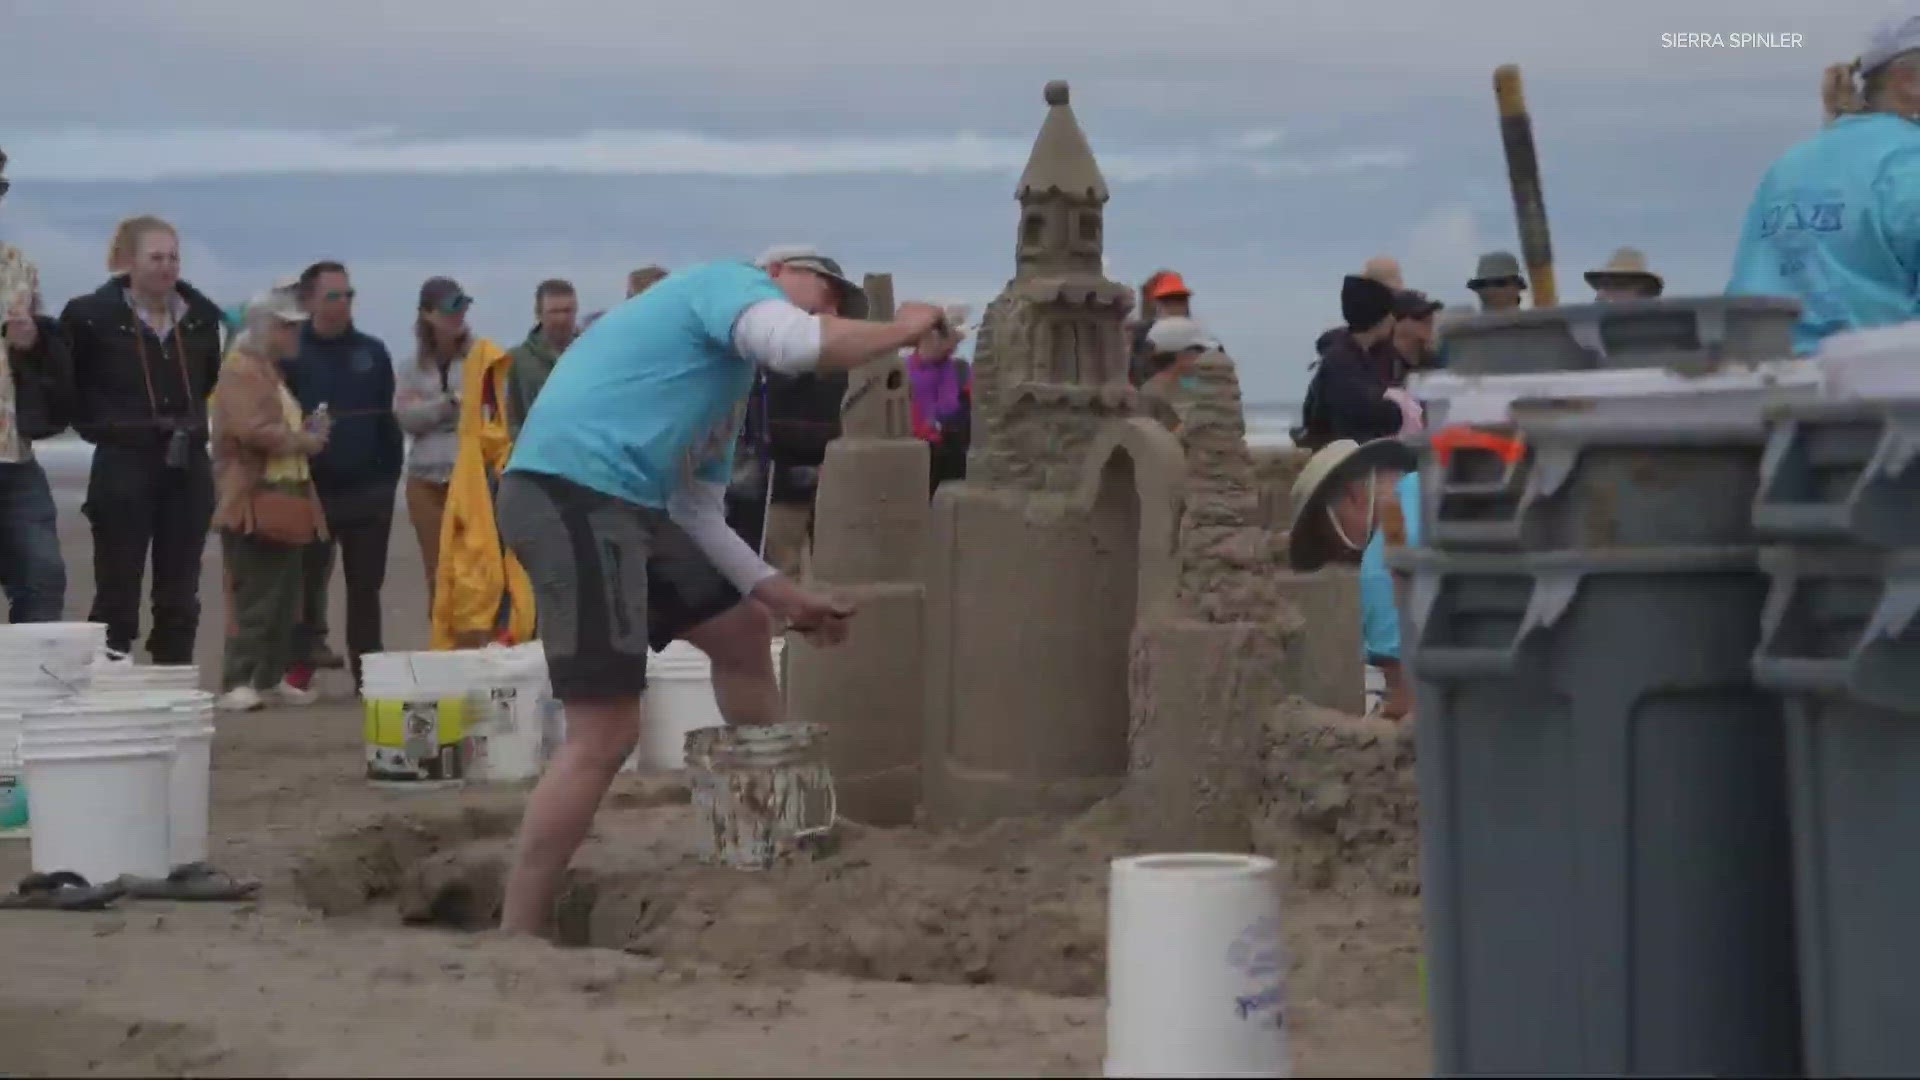 Competition categories range from families with young kids to experienced sandcastle builders. Everyone is encouraged to join the fun and show off their skills.